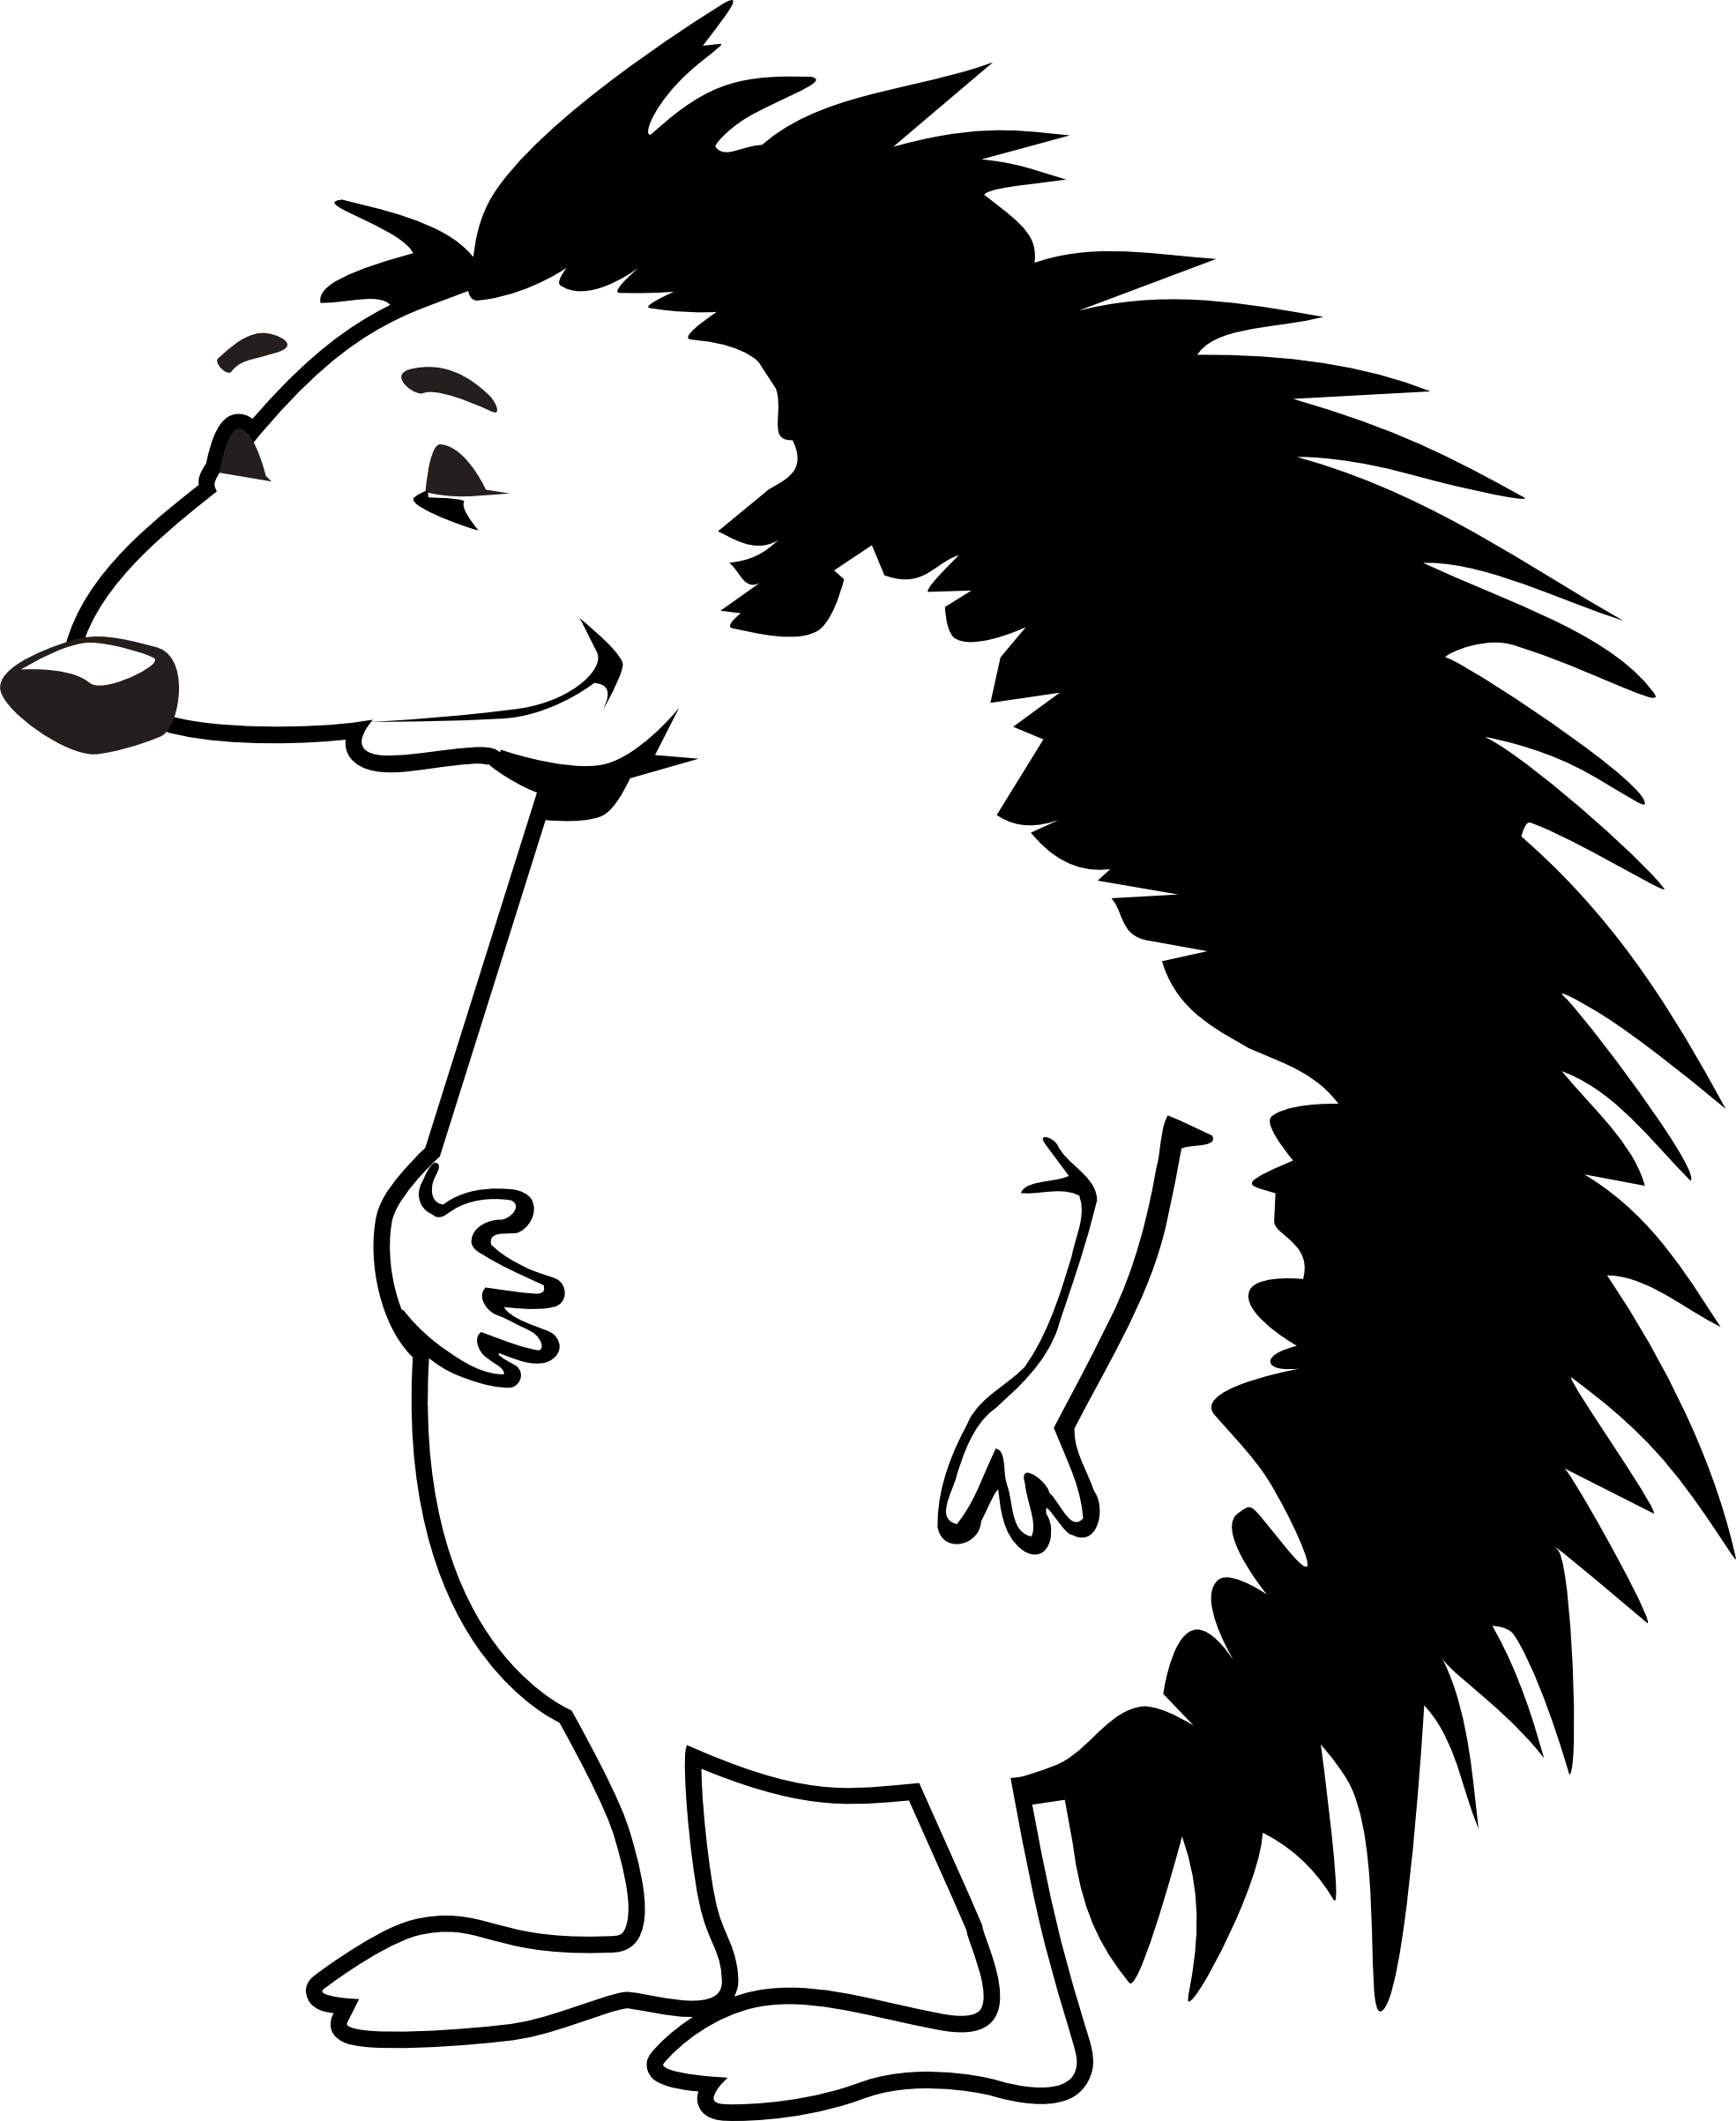 Hedgehog Black And White Clipart